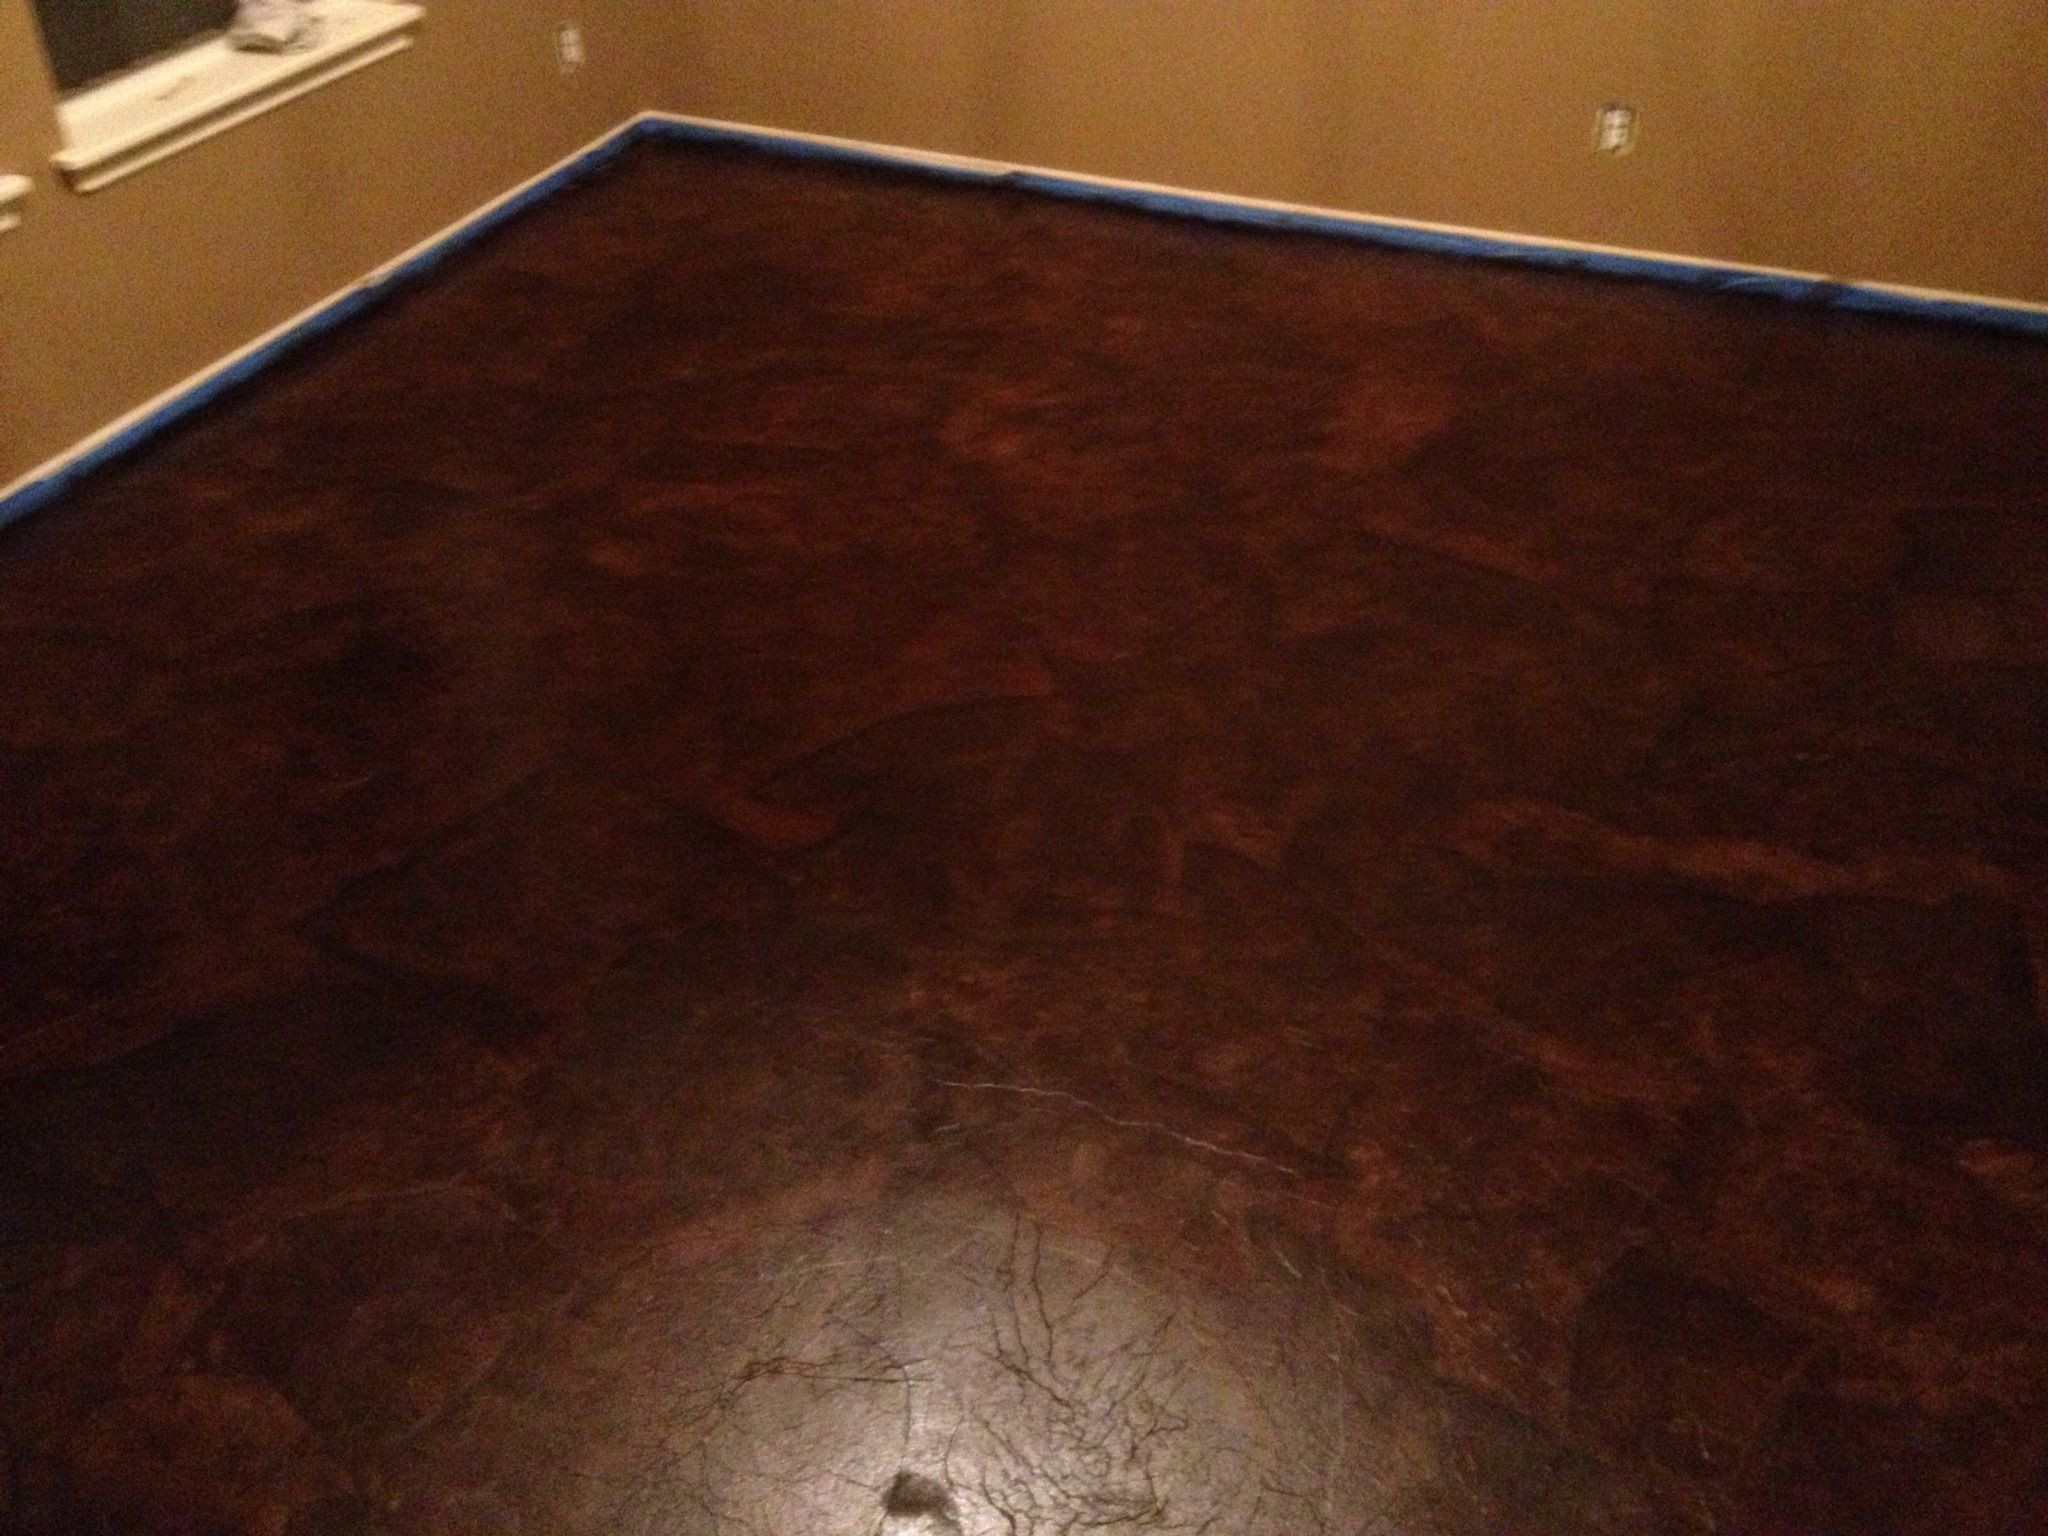 14 Ideal How to Install Hardwood Floor Near Wall 2024 free download how to install hardwood floor near wall of diy paper bag floors that look like stained concrete diy brown regarding brown paper bag stained floors amazing project excellent instructions on h